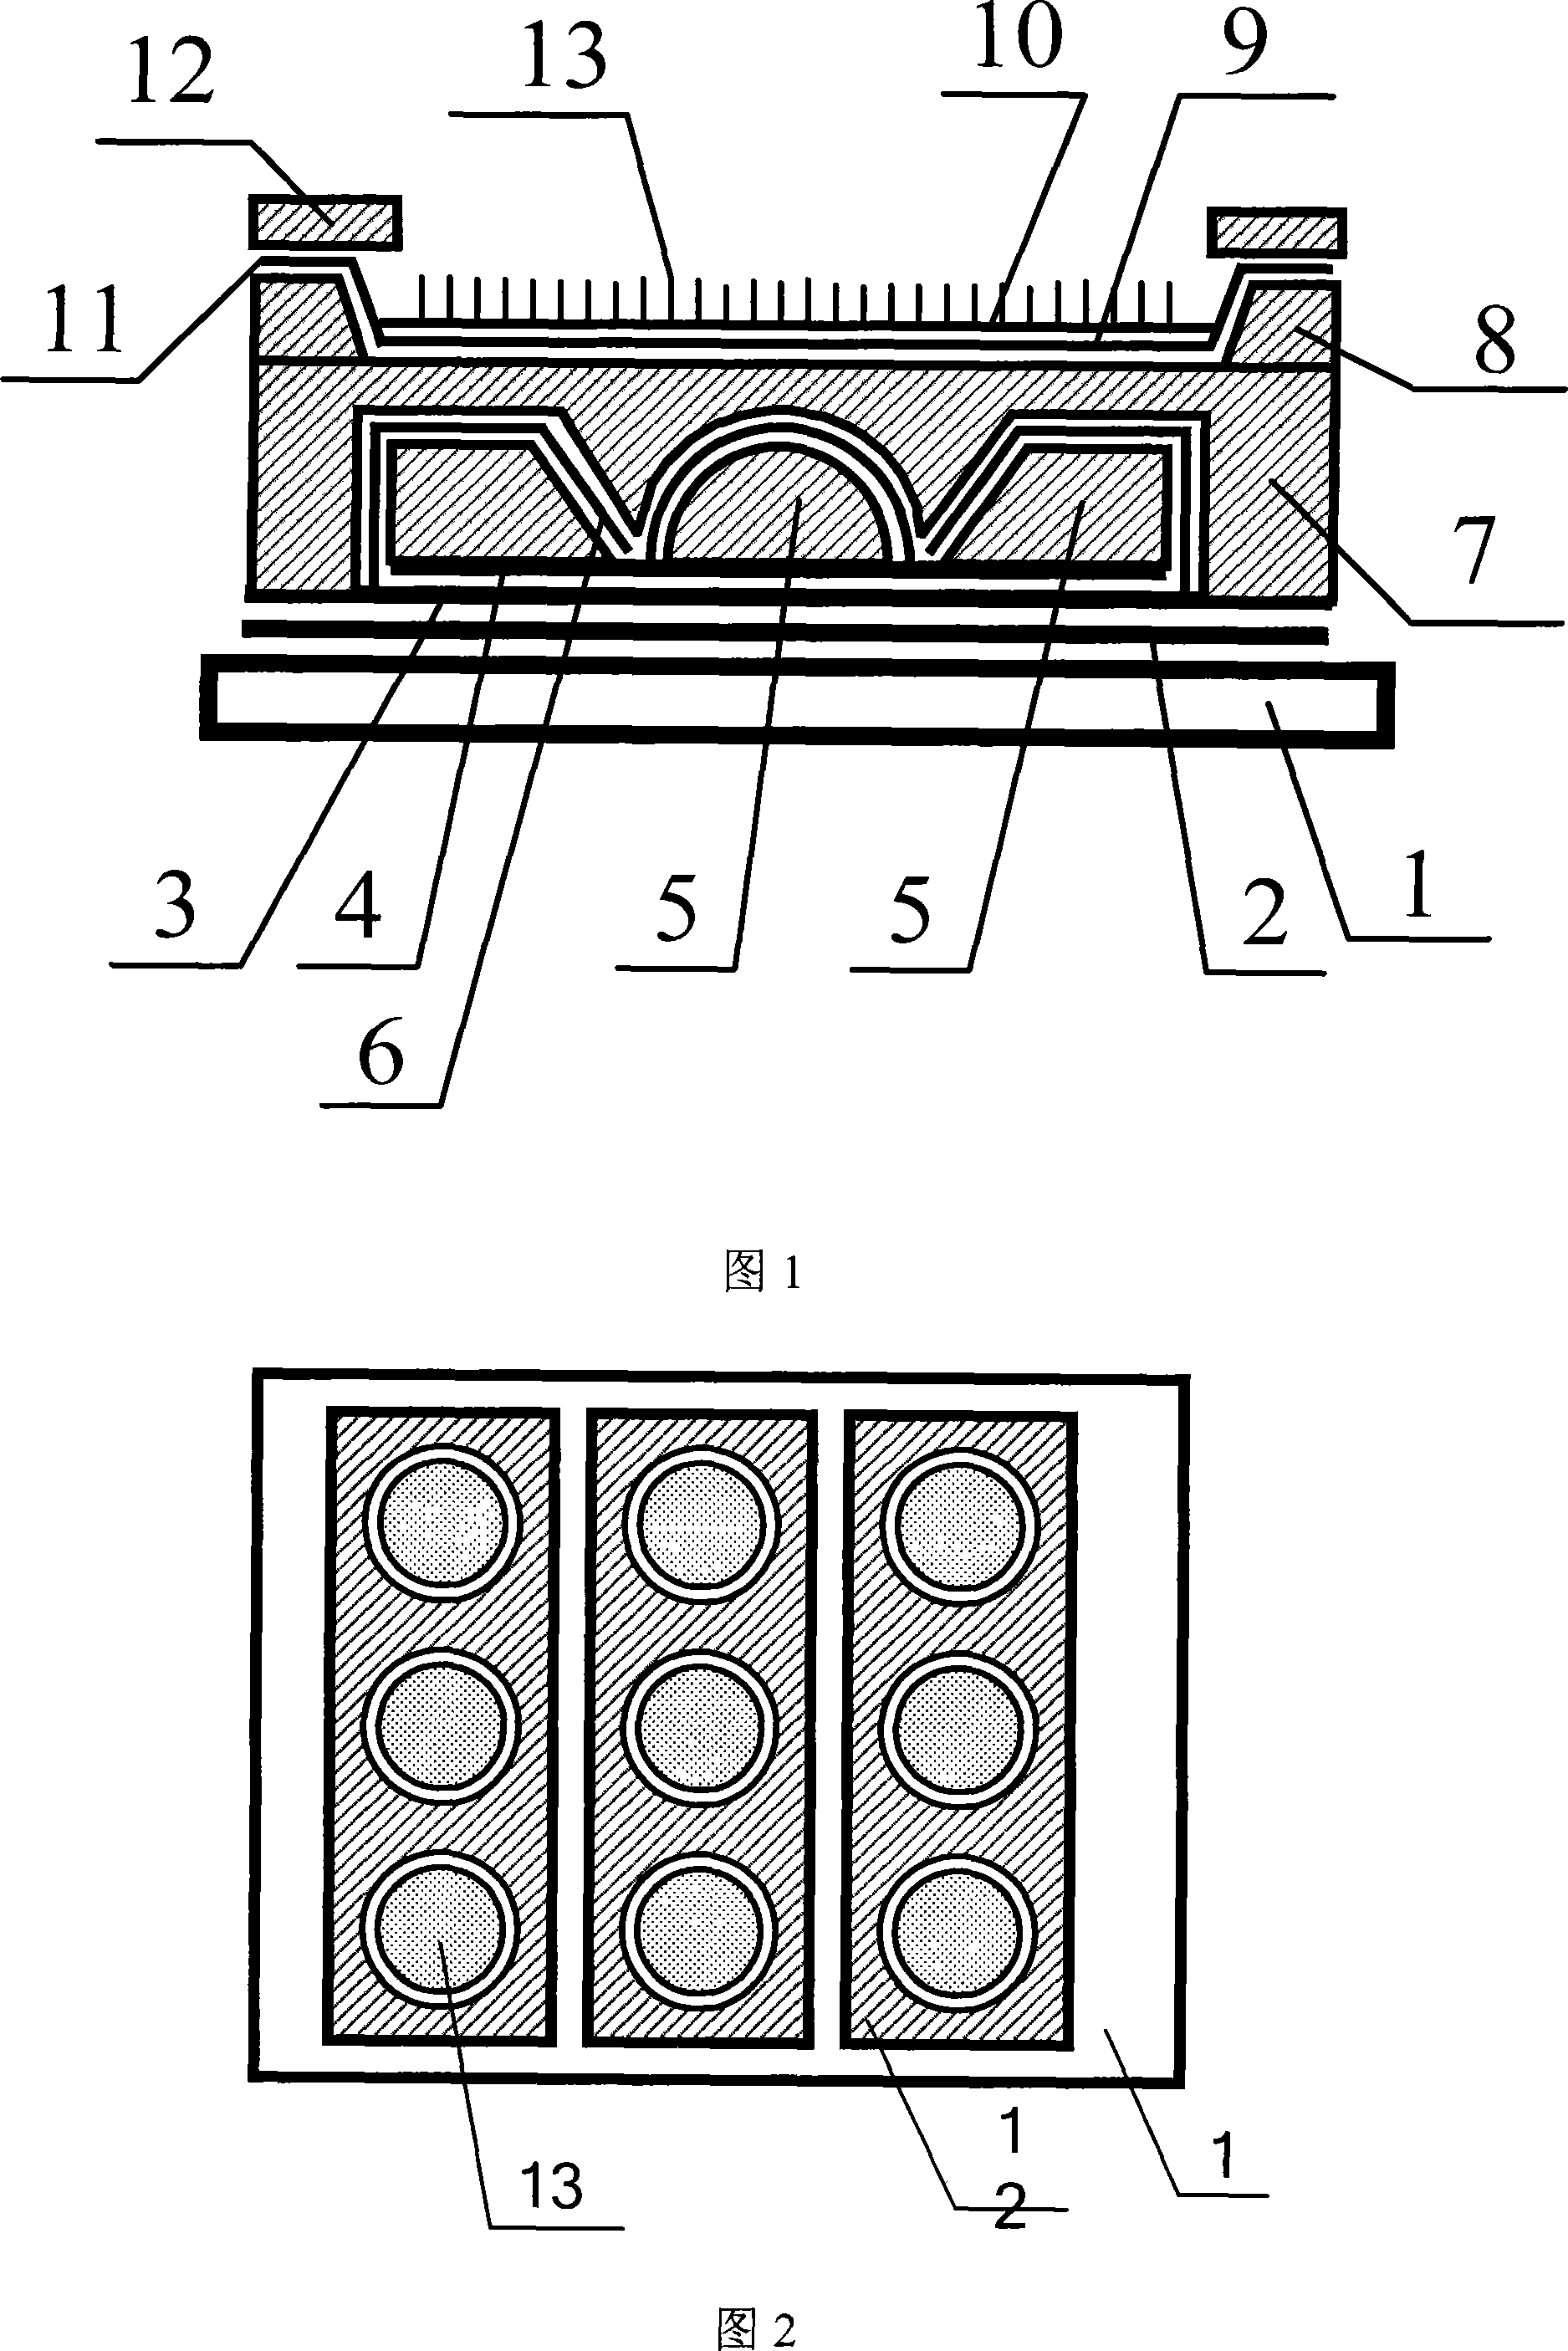 Flat-panel display device with ring band lower gate cnodulated emission structure and its preparing process